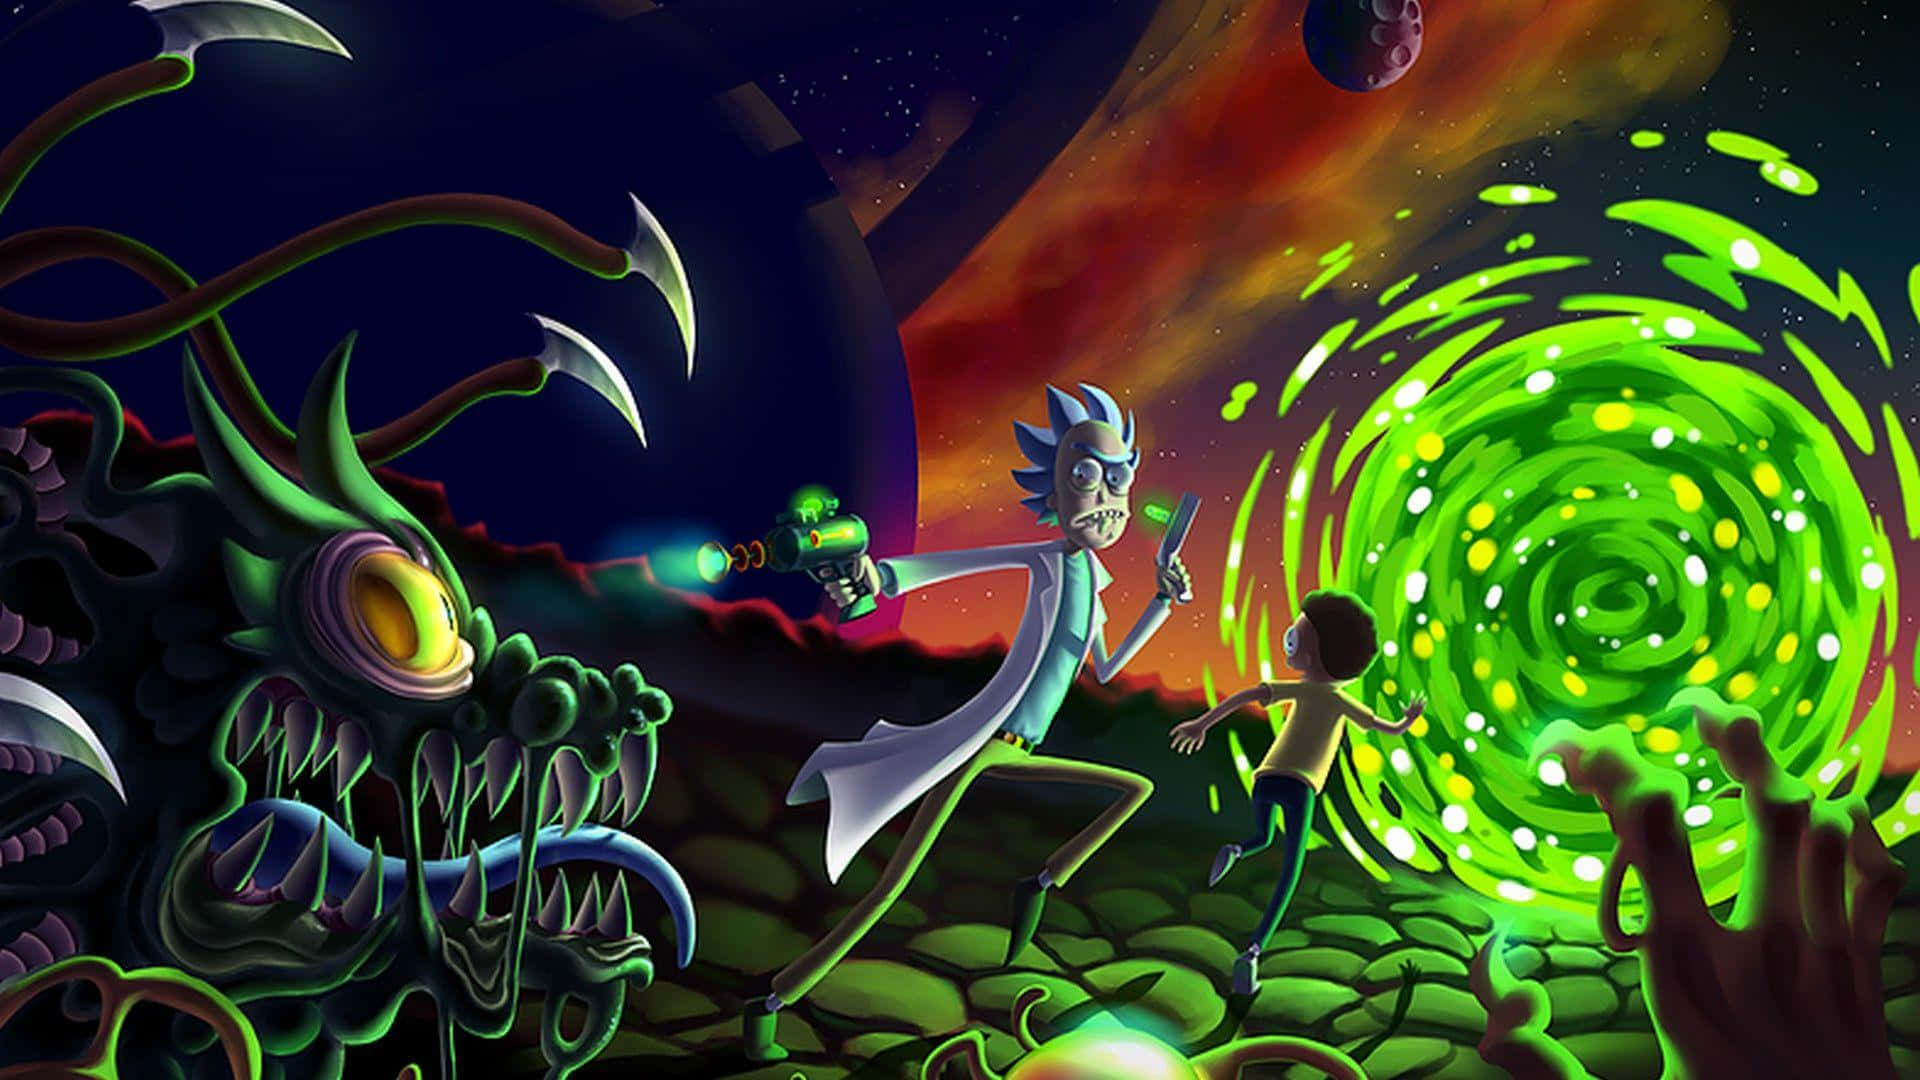 Bring home the fun interstellar adventures of Rick and Morty with this vibrant 1920x1080 wallpaper. Wallpaper